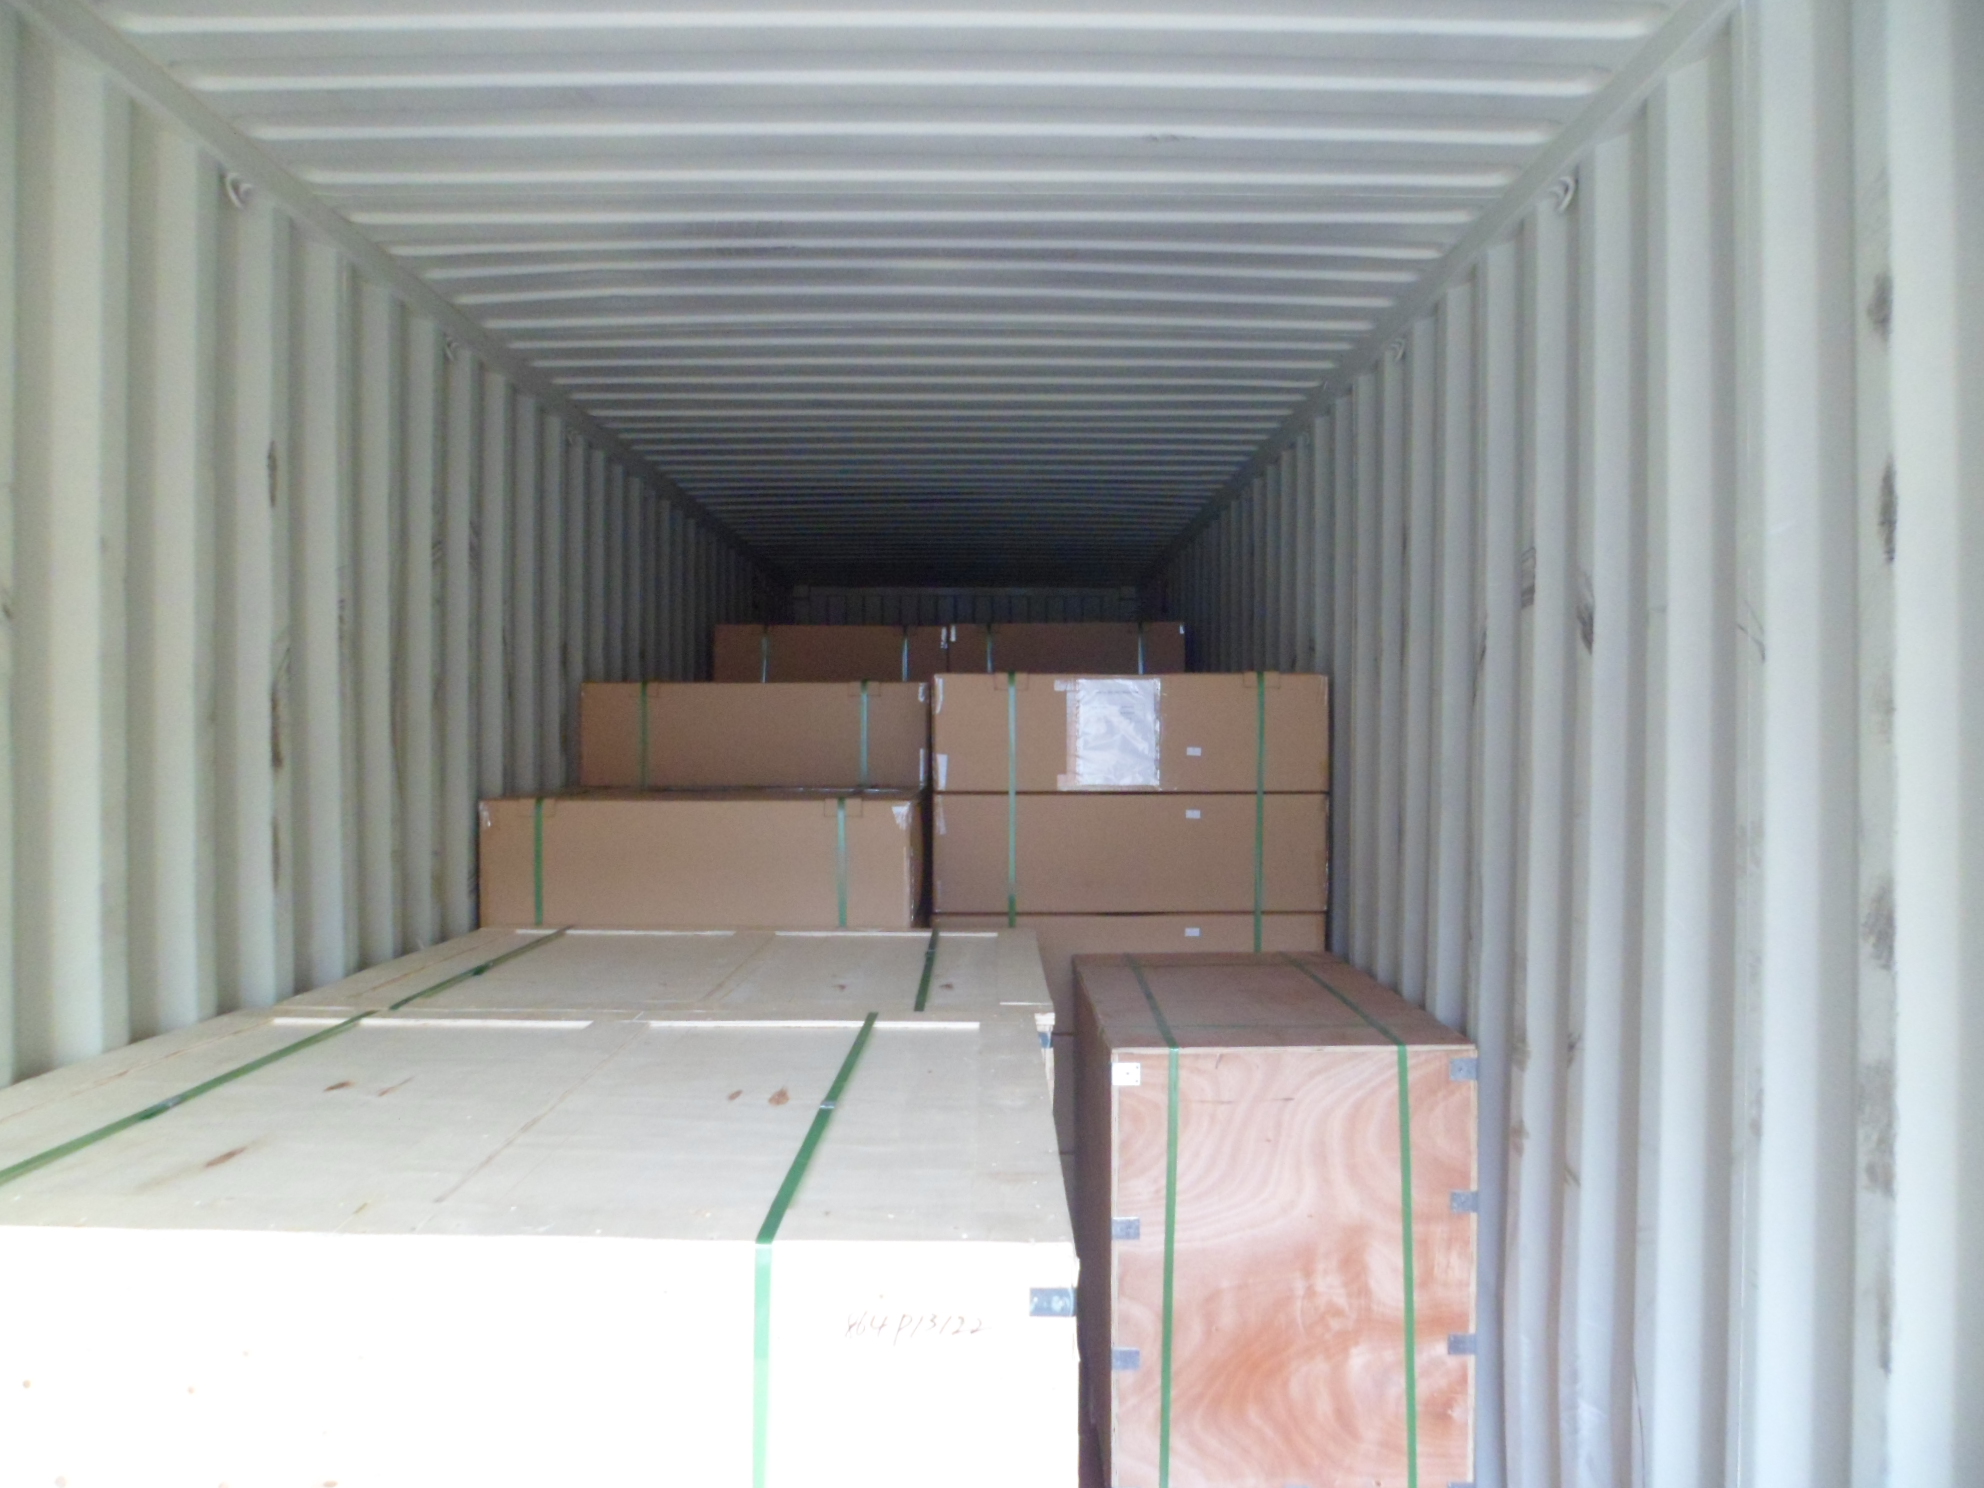 All in container